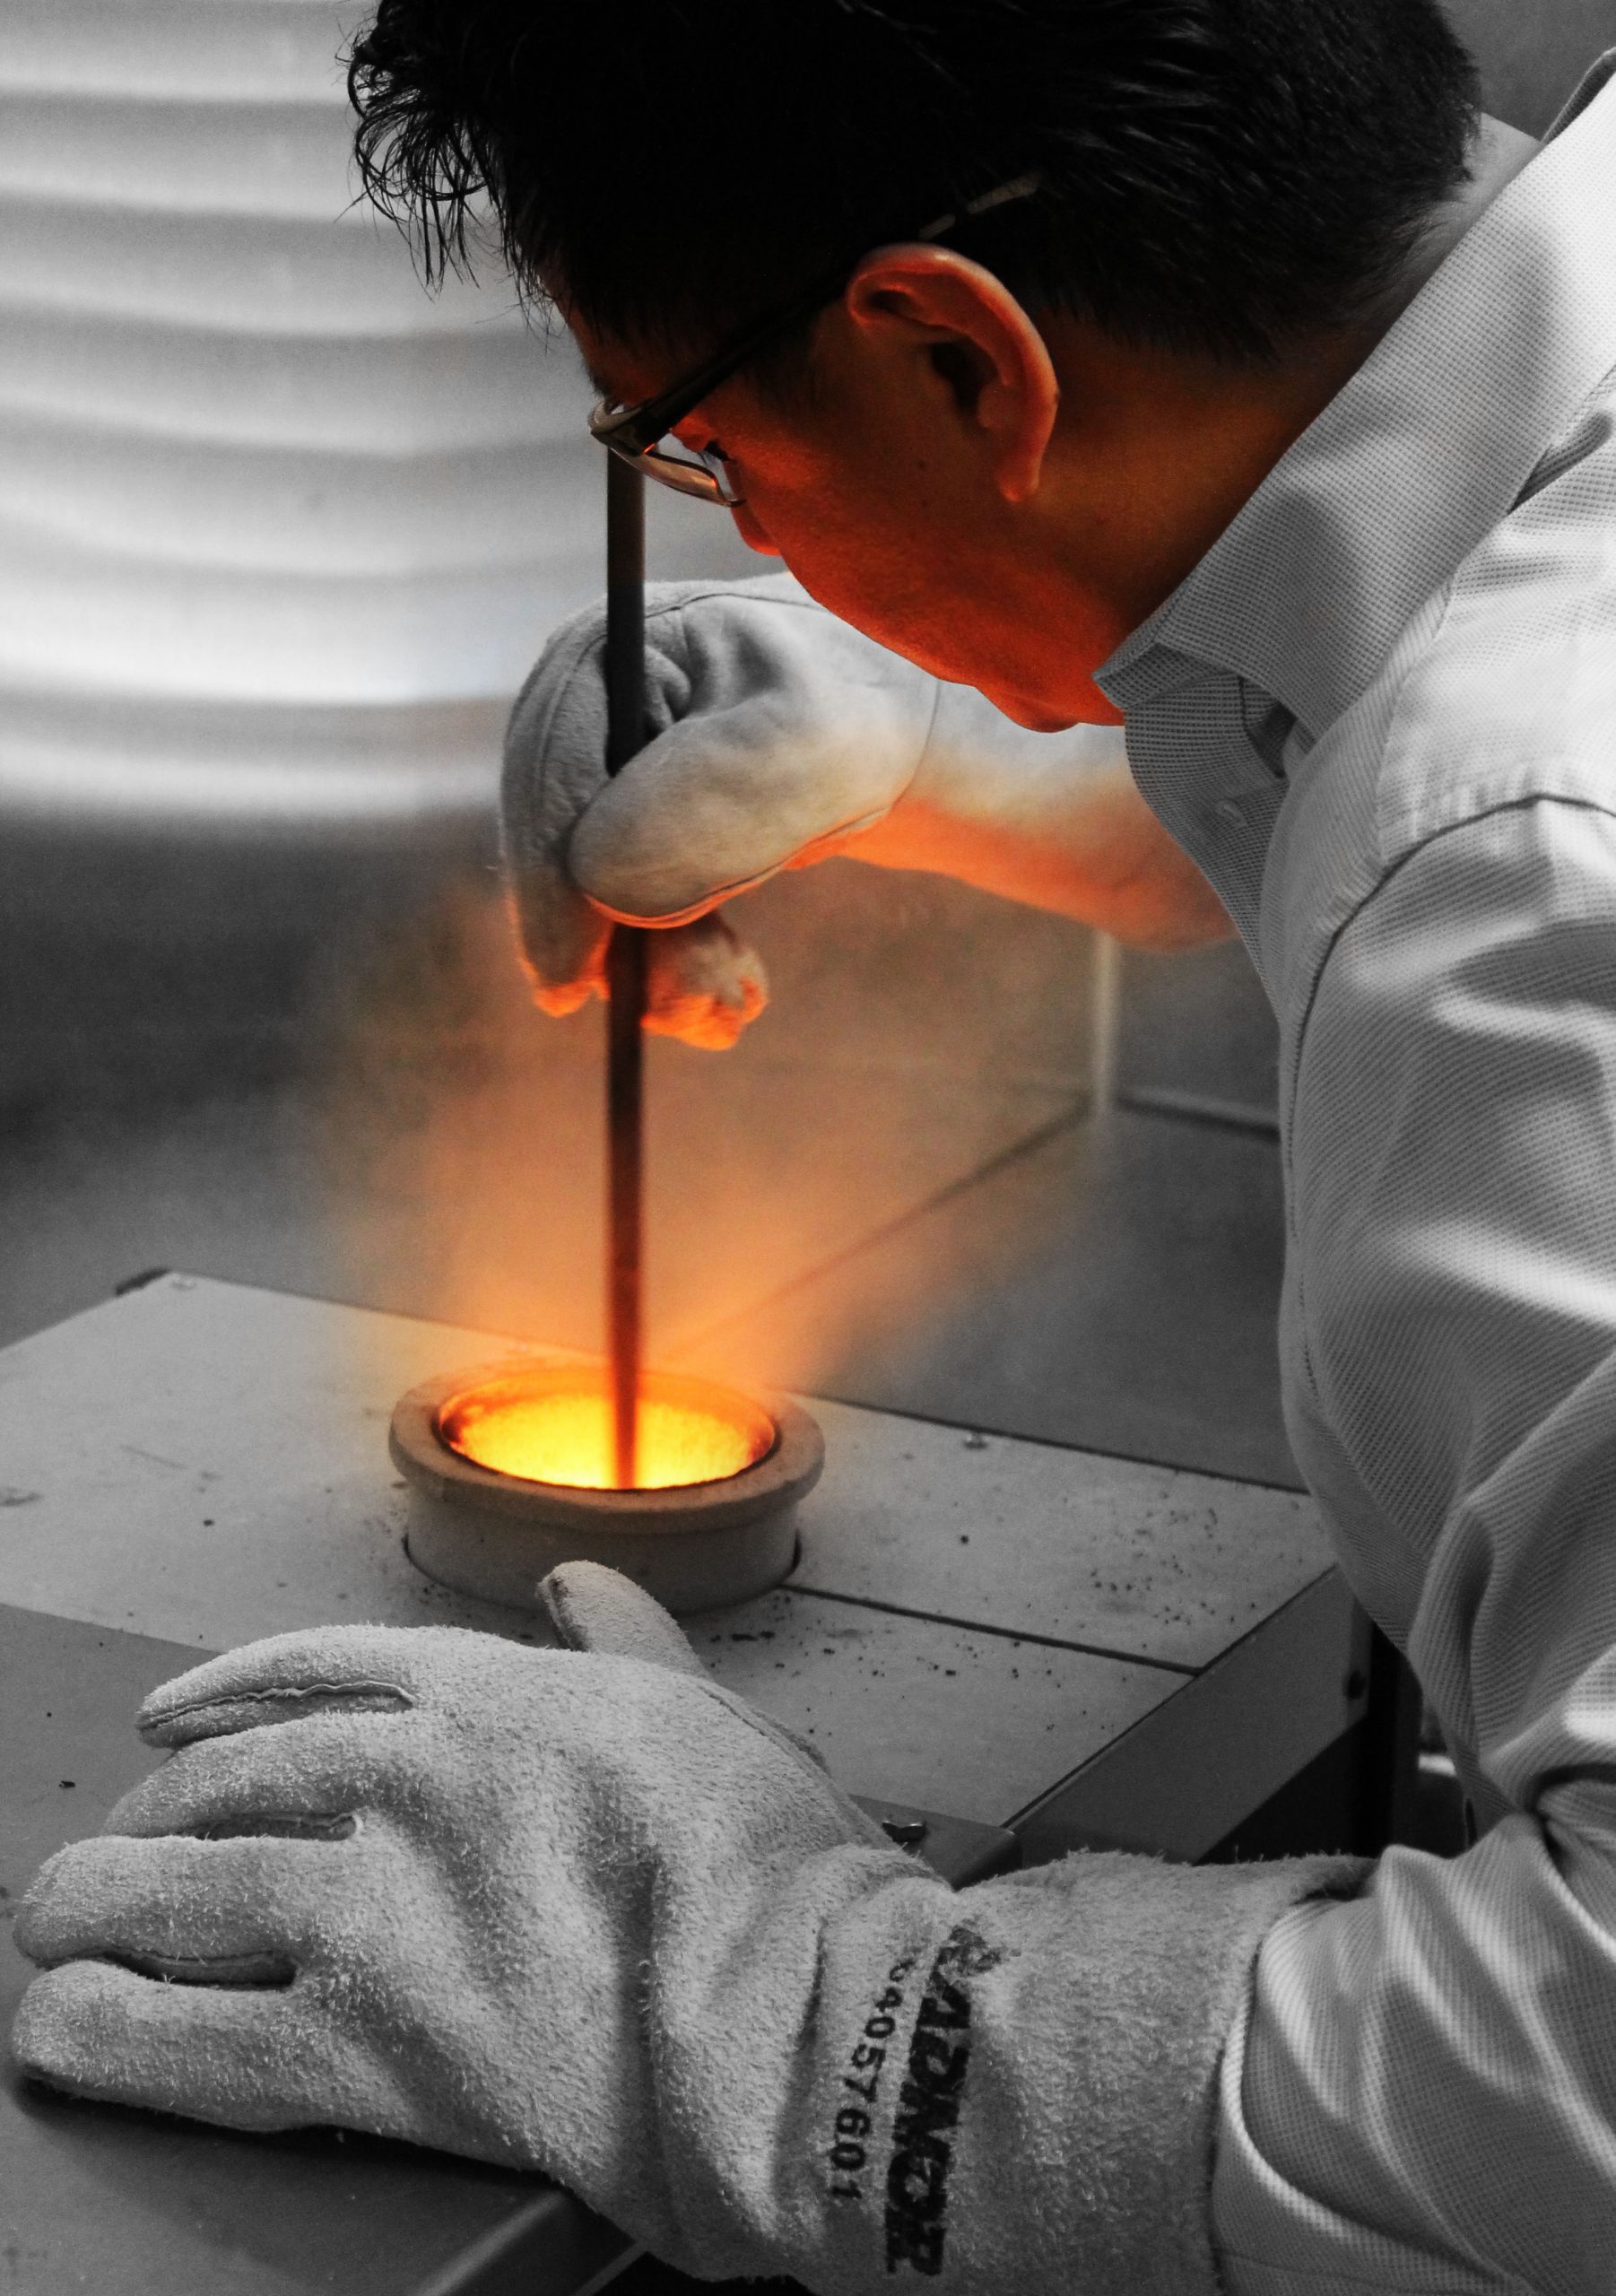 We stir the molten gold to even the gold to a homogenous mixture